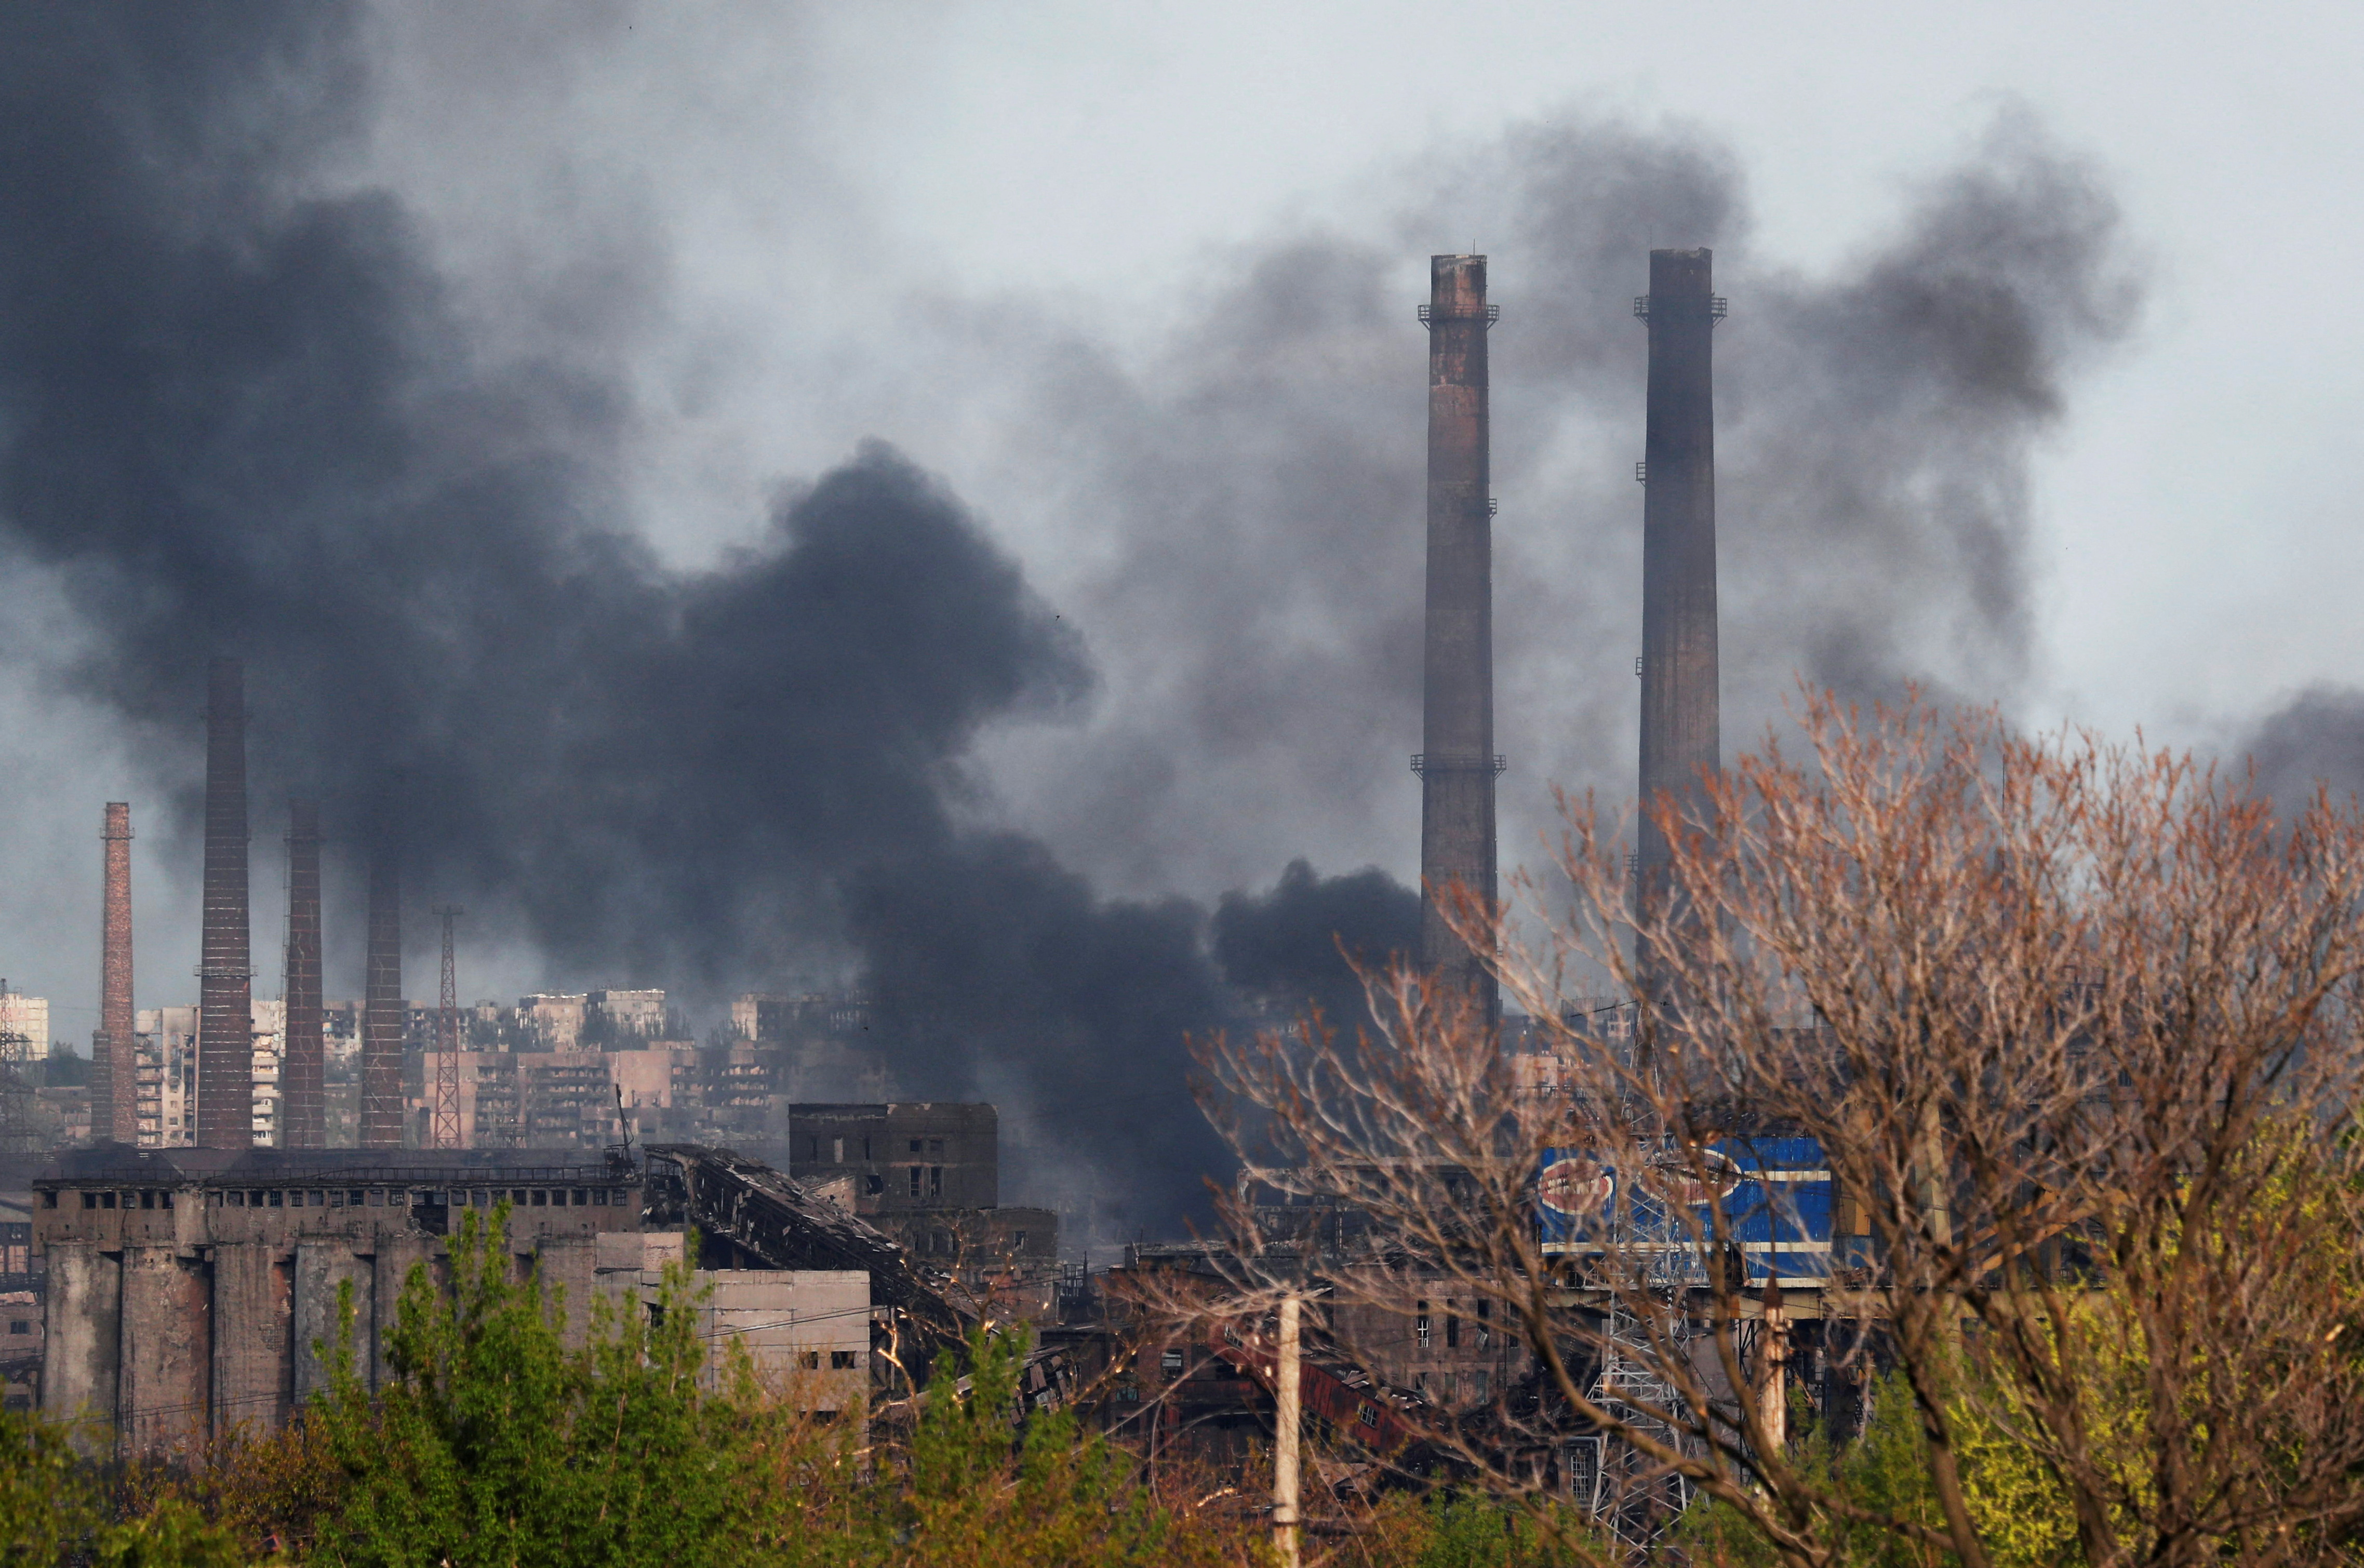 File image: Smoke billows from the Azovstal iron and steel plant during the conflict between Ukraine and Russia on May 2, 2022, in the southern Ukrainian port city of Mariupol.  REUTERS / Alexander Ermochenko / File Photo